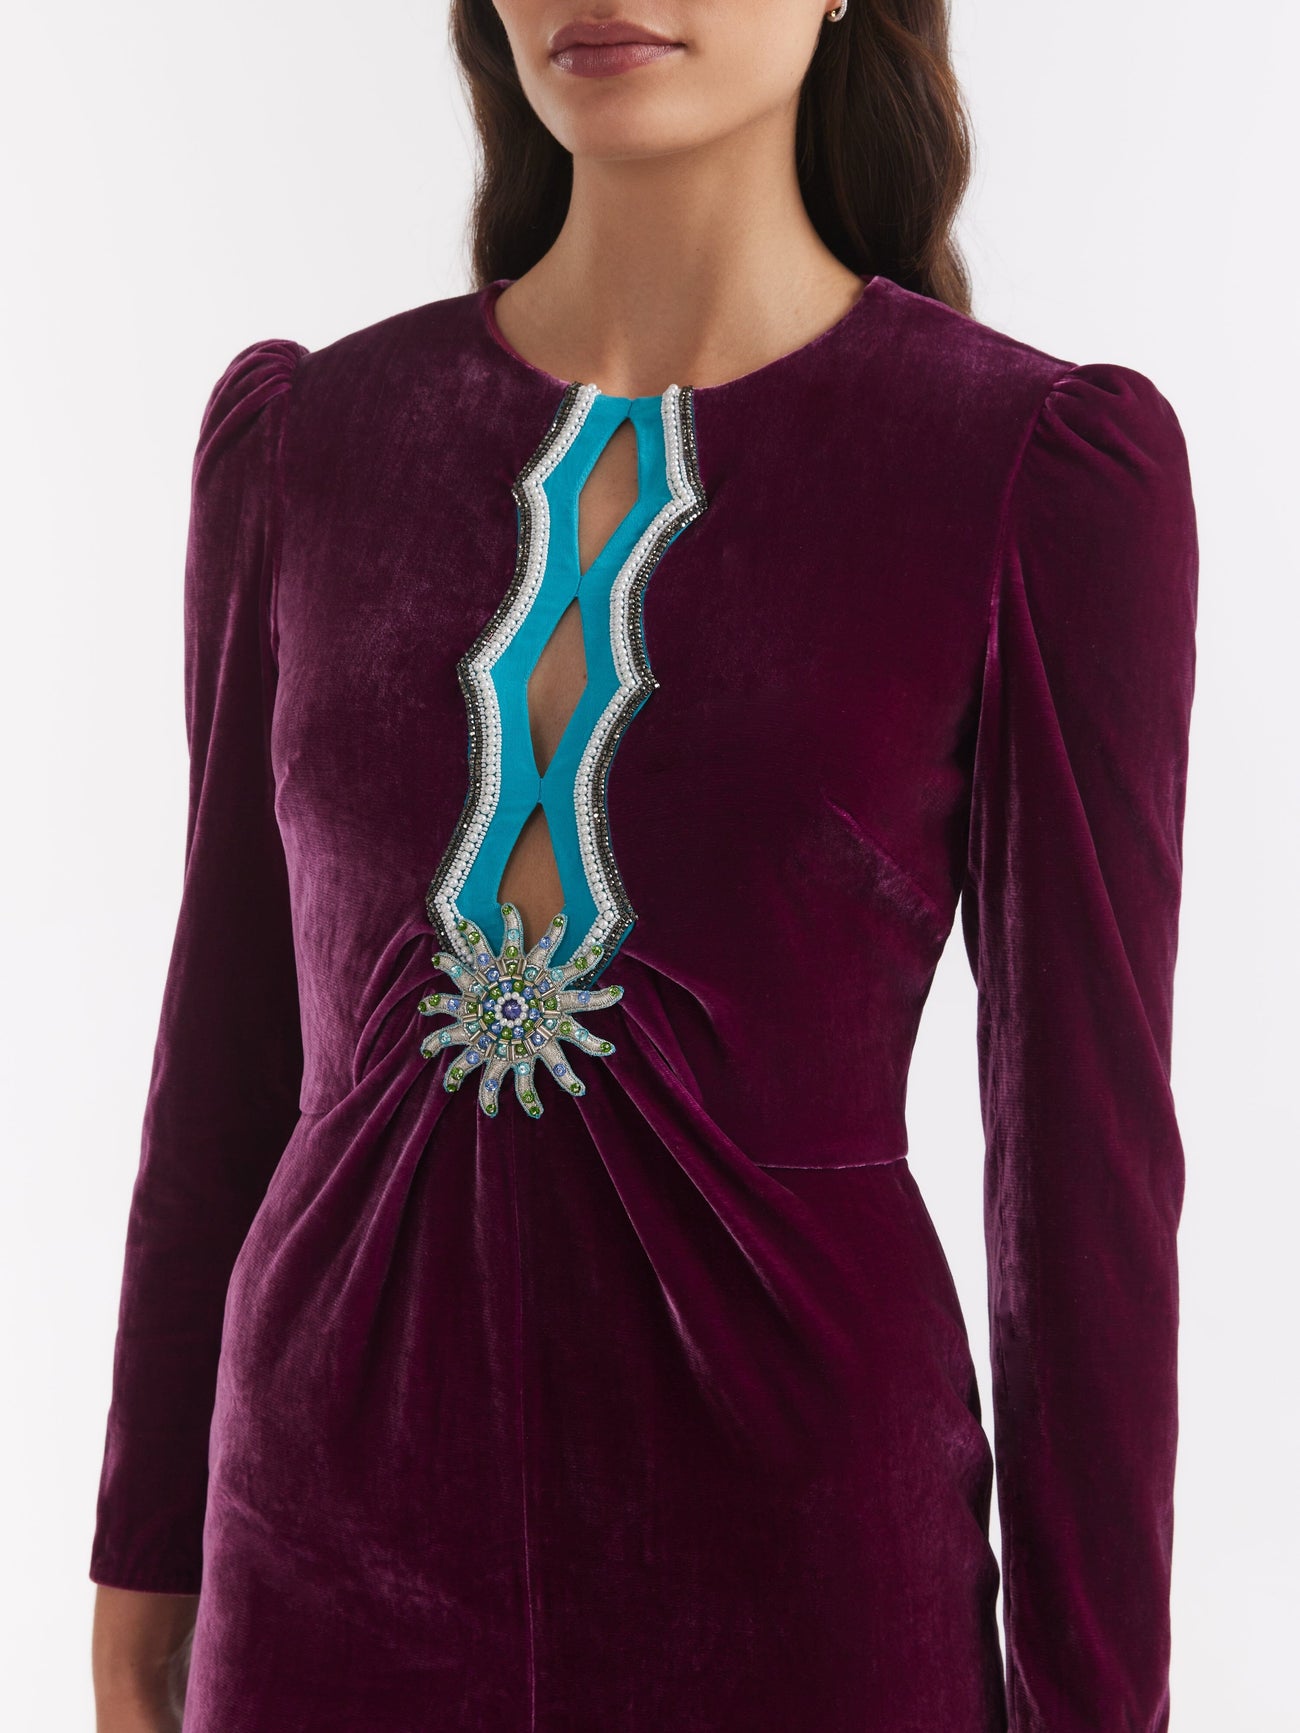 Load image into Gallery viewer, Jinx C Dress in Azalea Teal Embroidery